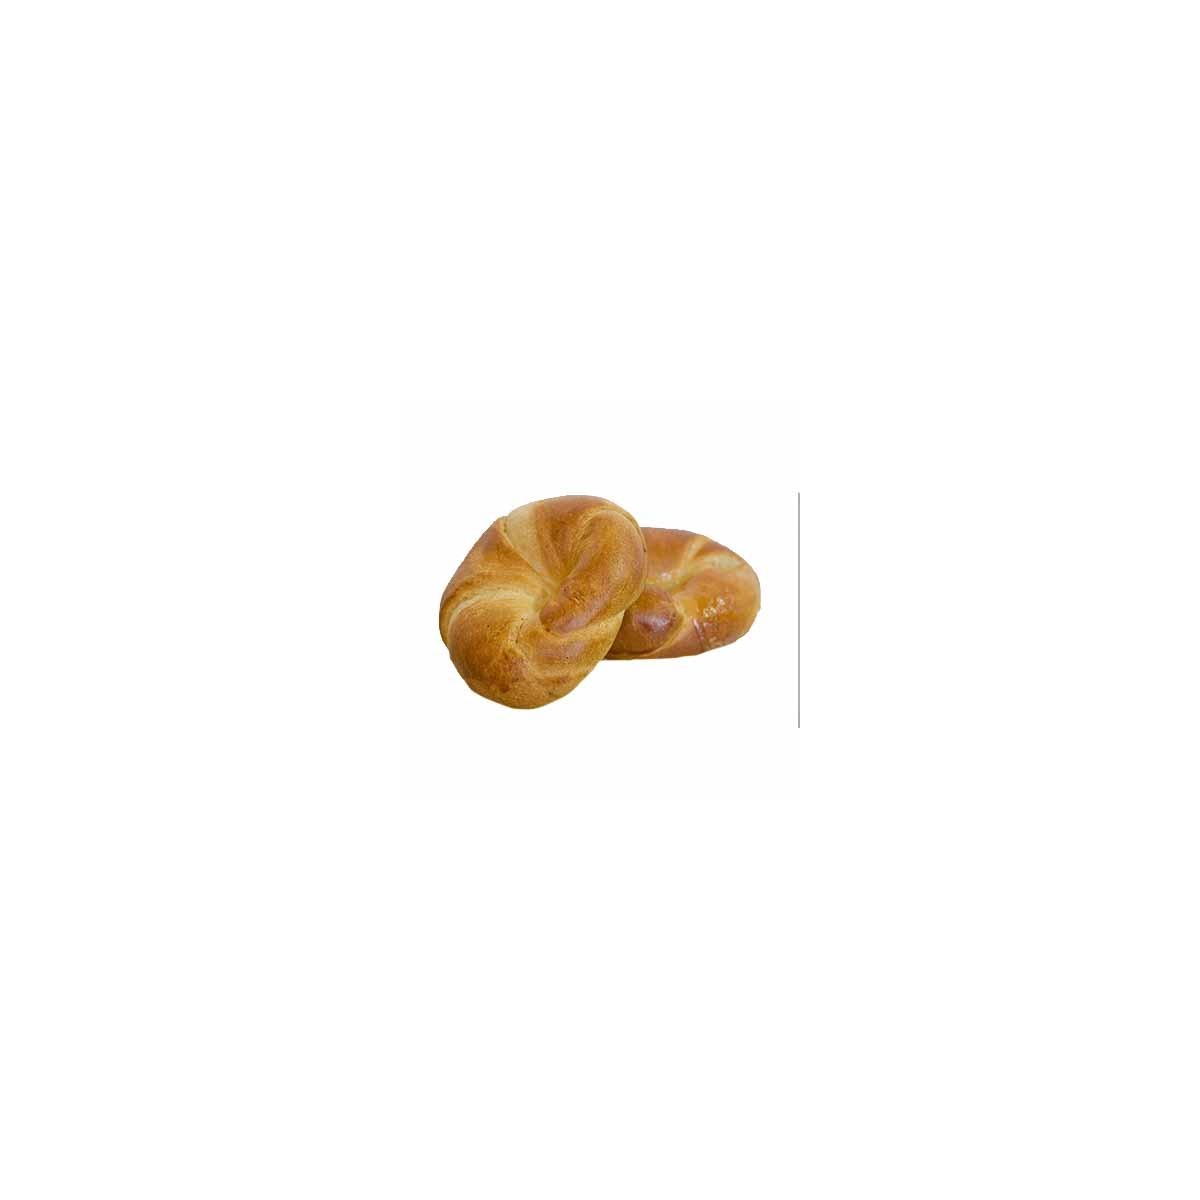 PANISTAR 005 SWEET CURVED CROISSANT   RAW 150X95GRBOX